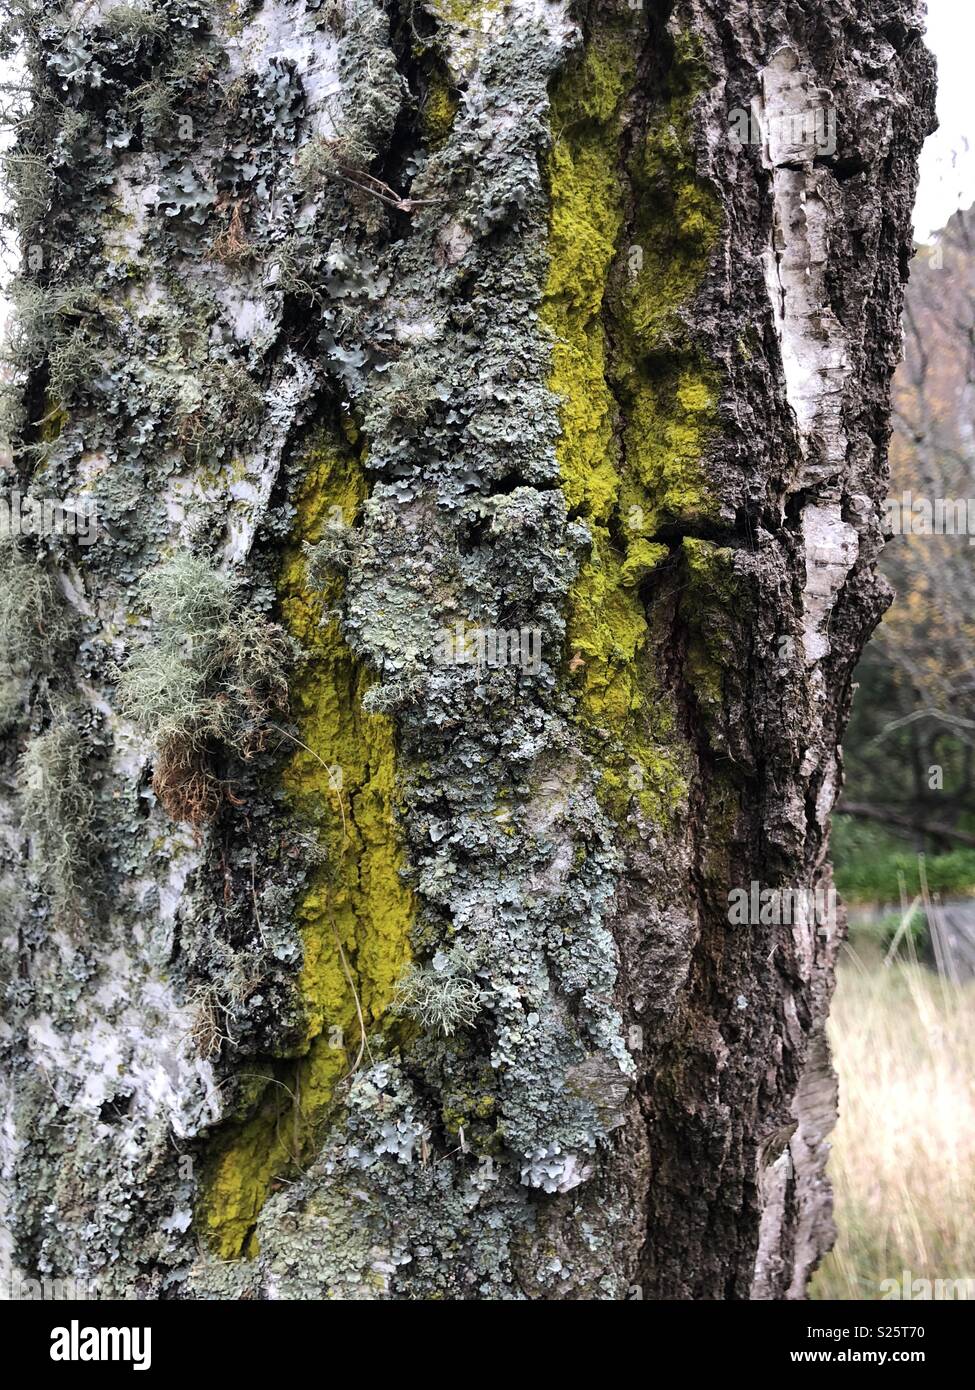 Trunk of tree with different lichens growing on it Stock Photo